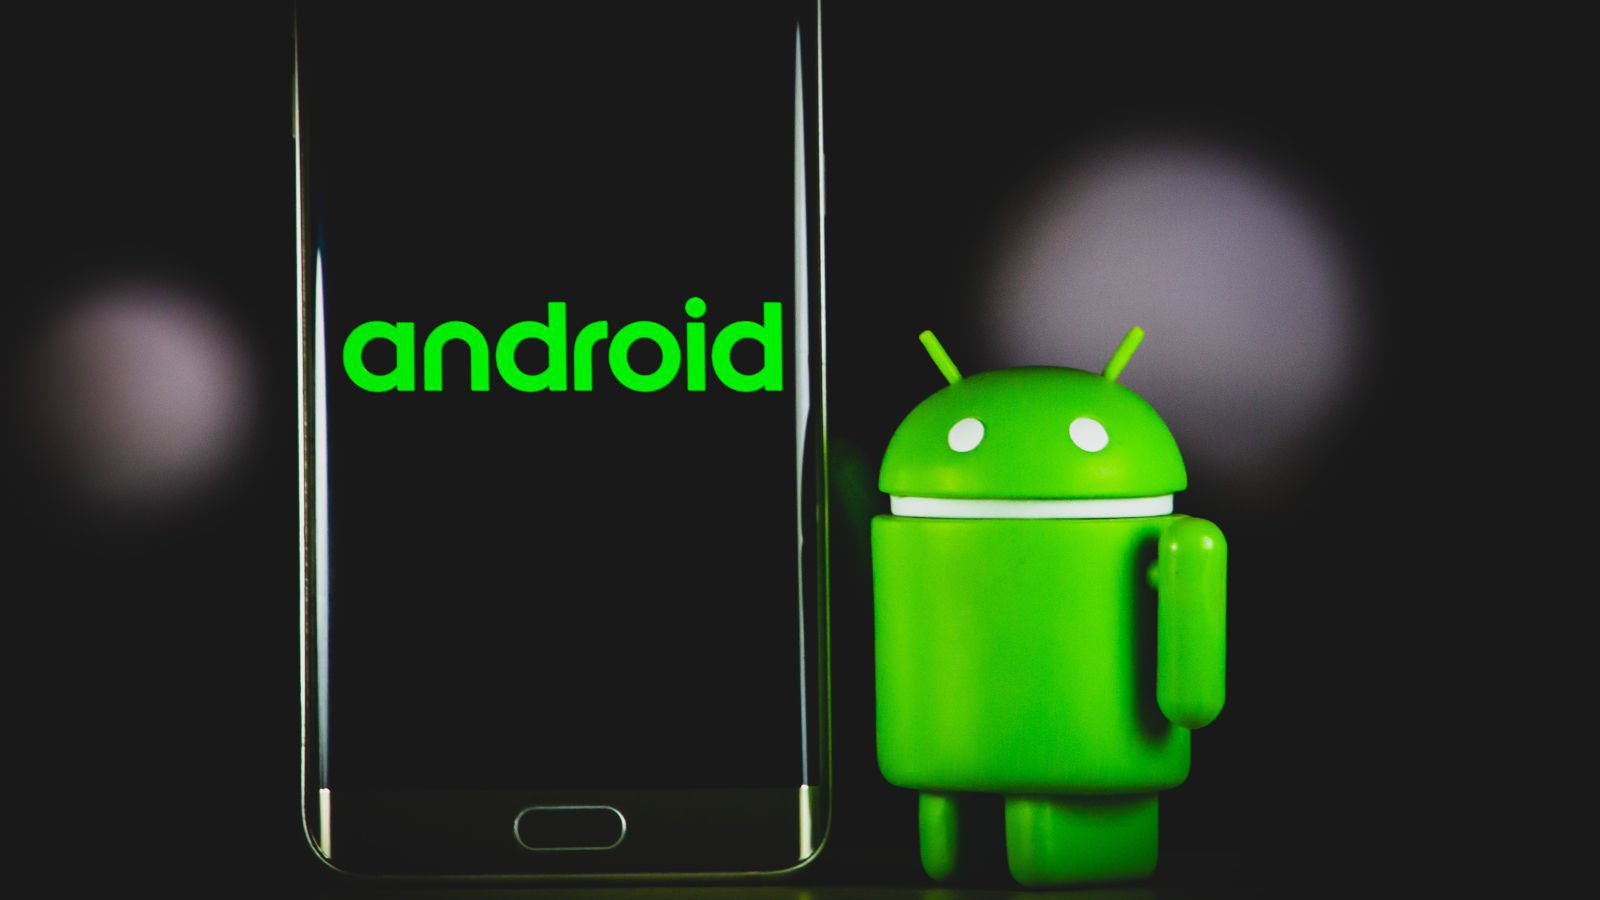 Android July security updates fix three actively exploited bugs – Source: www.bleepingcomputer.com